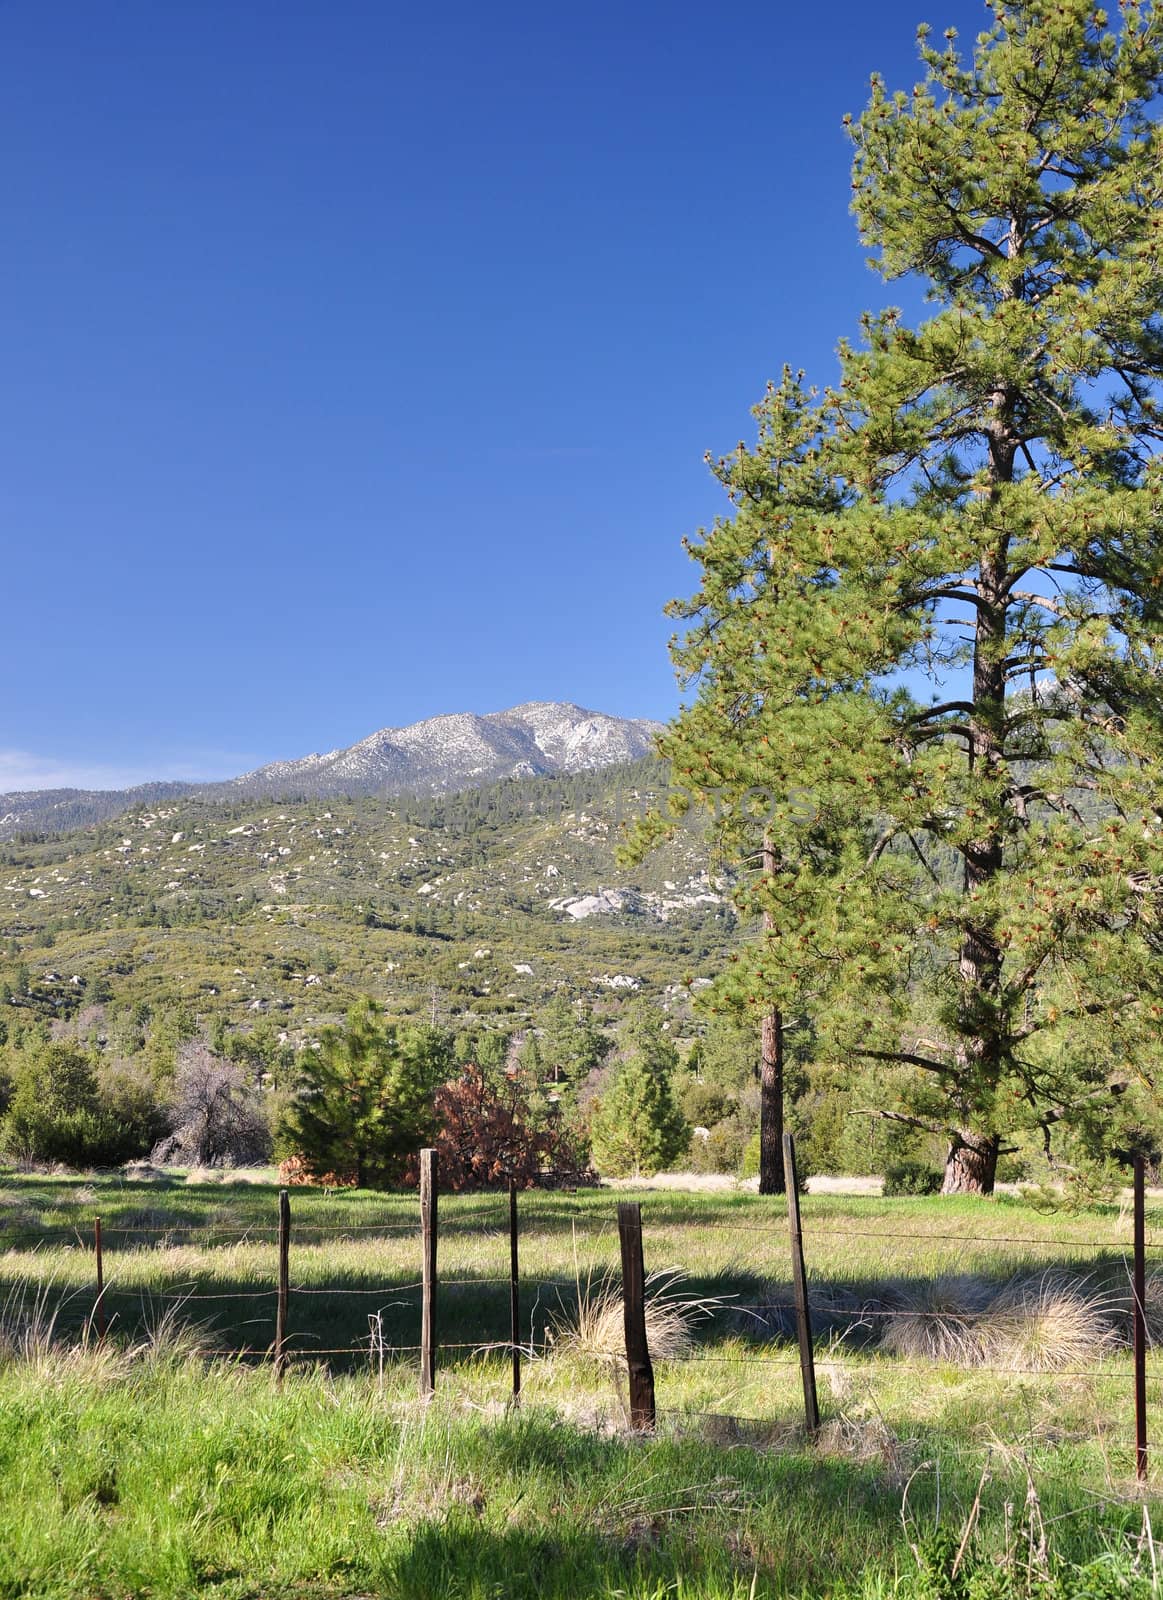 A ponderosa pine tree grows in a mountain meadow on Mount San Jacinto in Southern California.